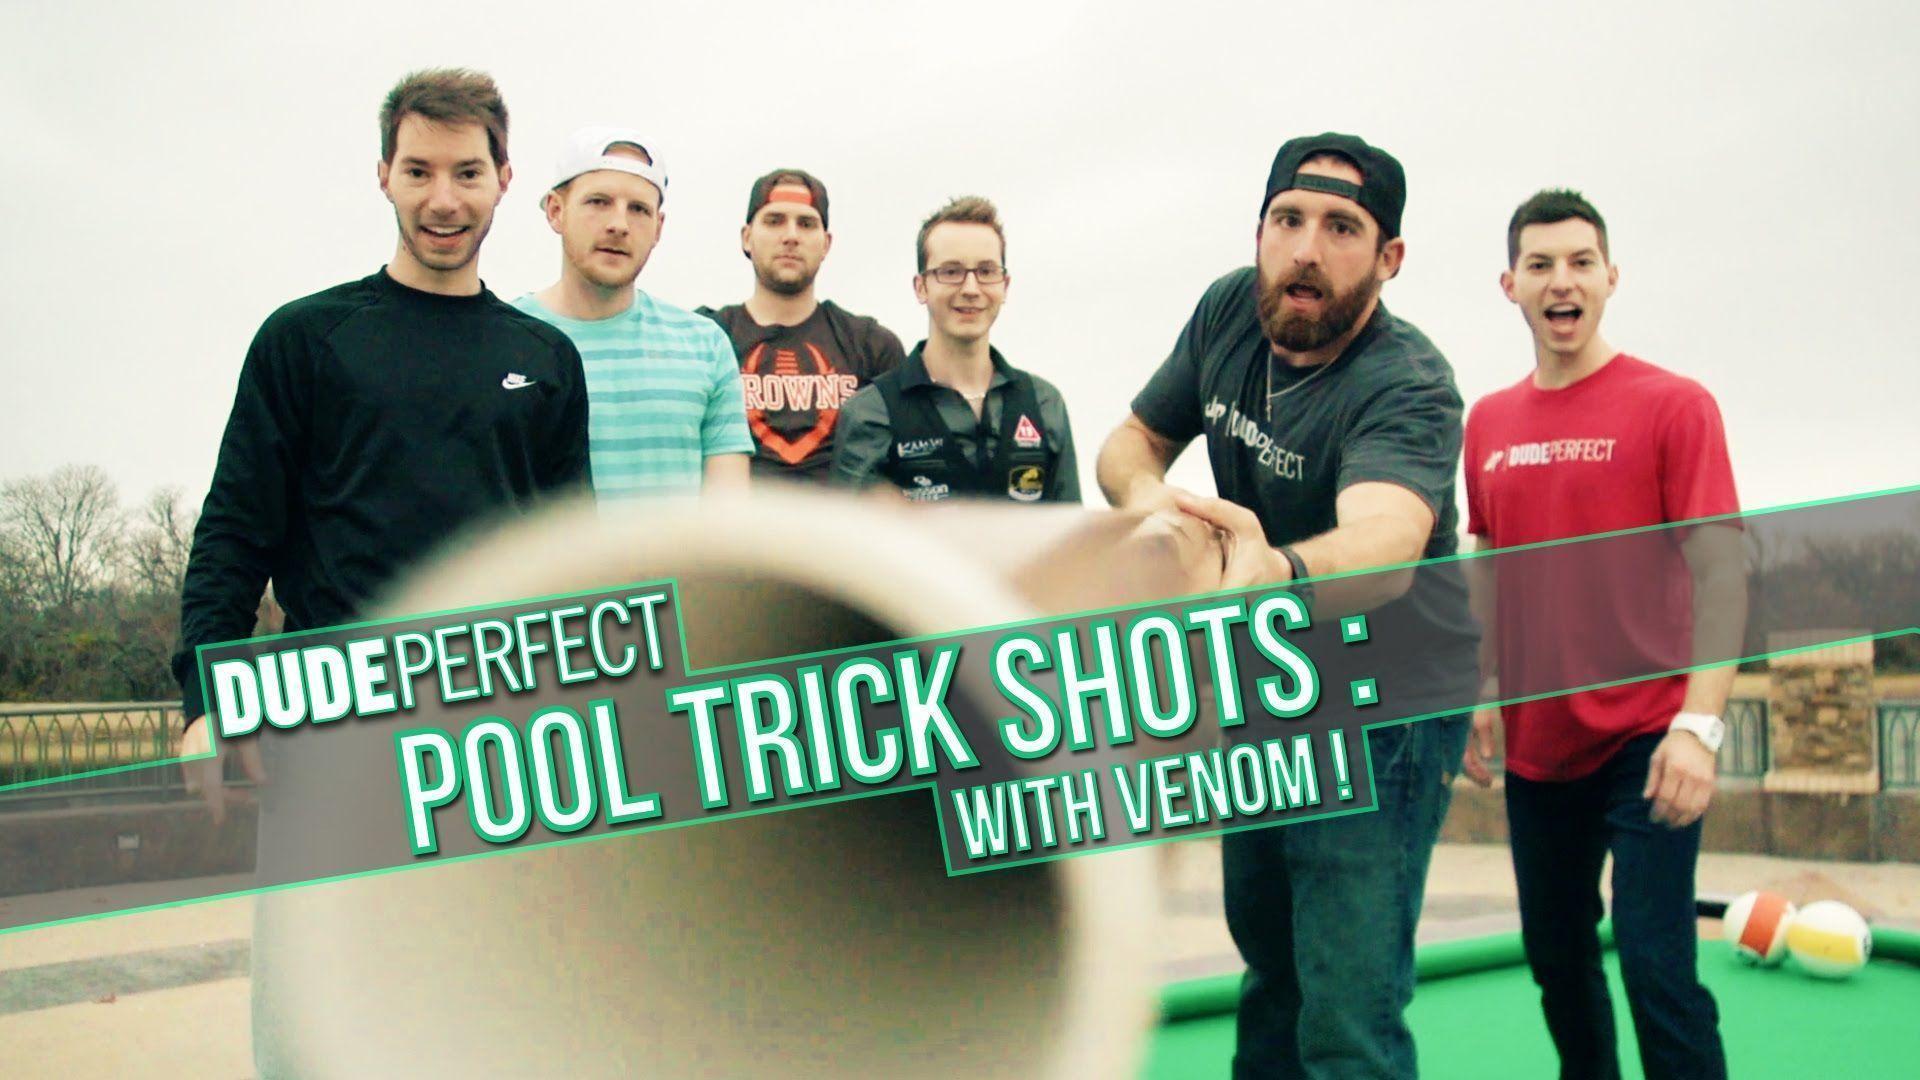 Dude Perfect. The Making Of Pool Trick Shots